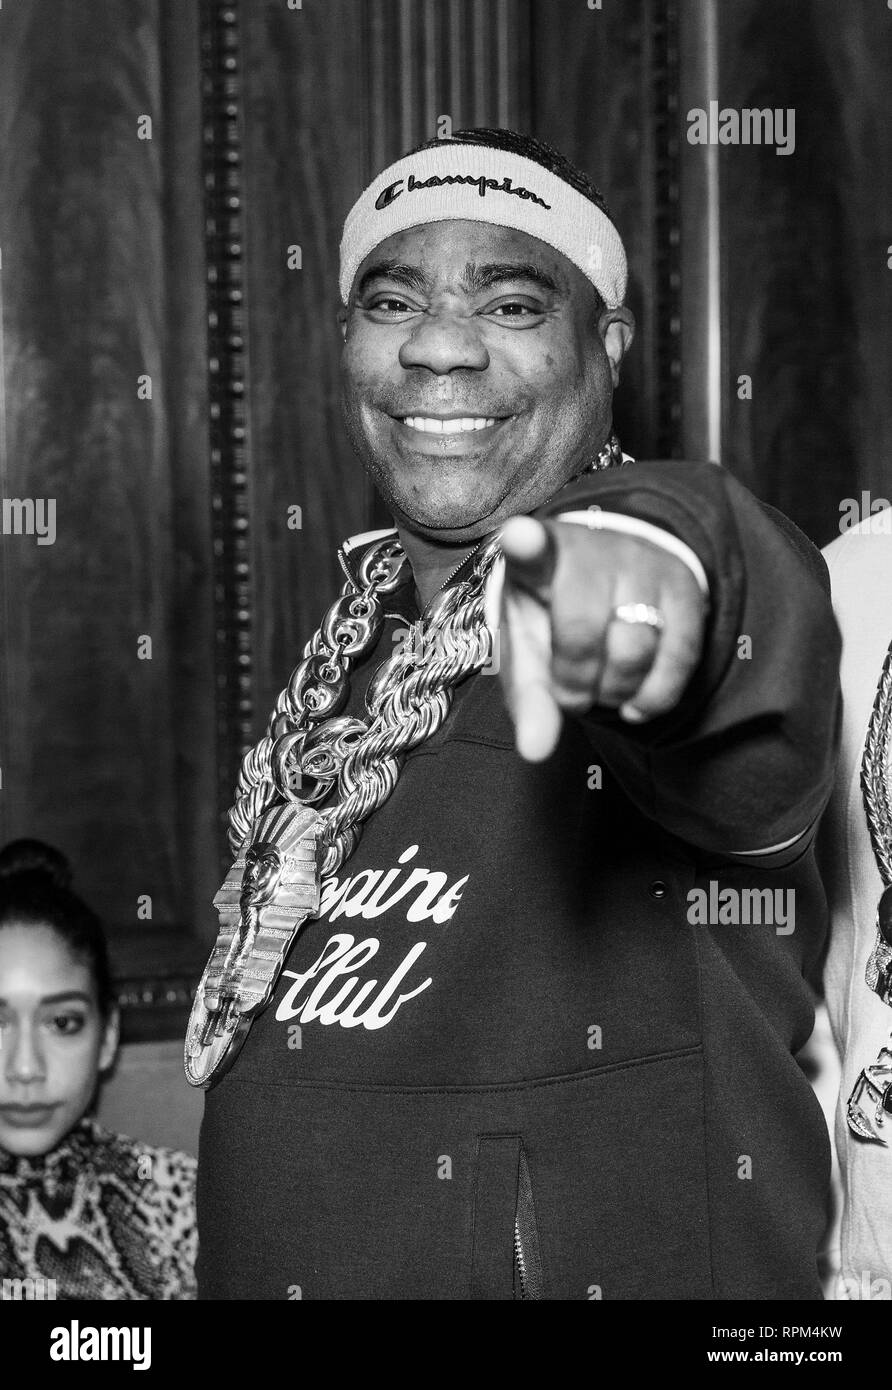 New York, United States. 21st Feb, 2019. Tracy Morgan attends Showtime debut of Late-Night Series DESUS & MERO at the Clocktower New York Edition Credit: Lev Radin/Pacific Press/Alamy Live News Stock Photo